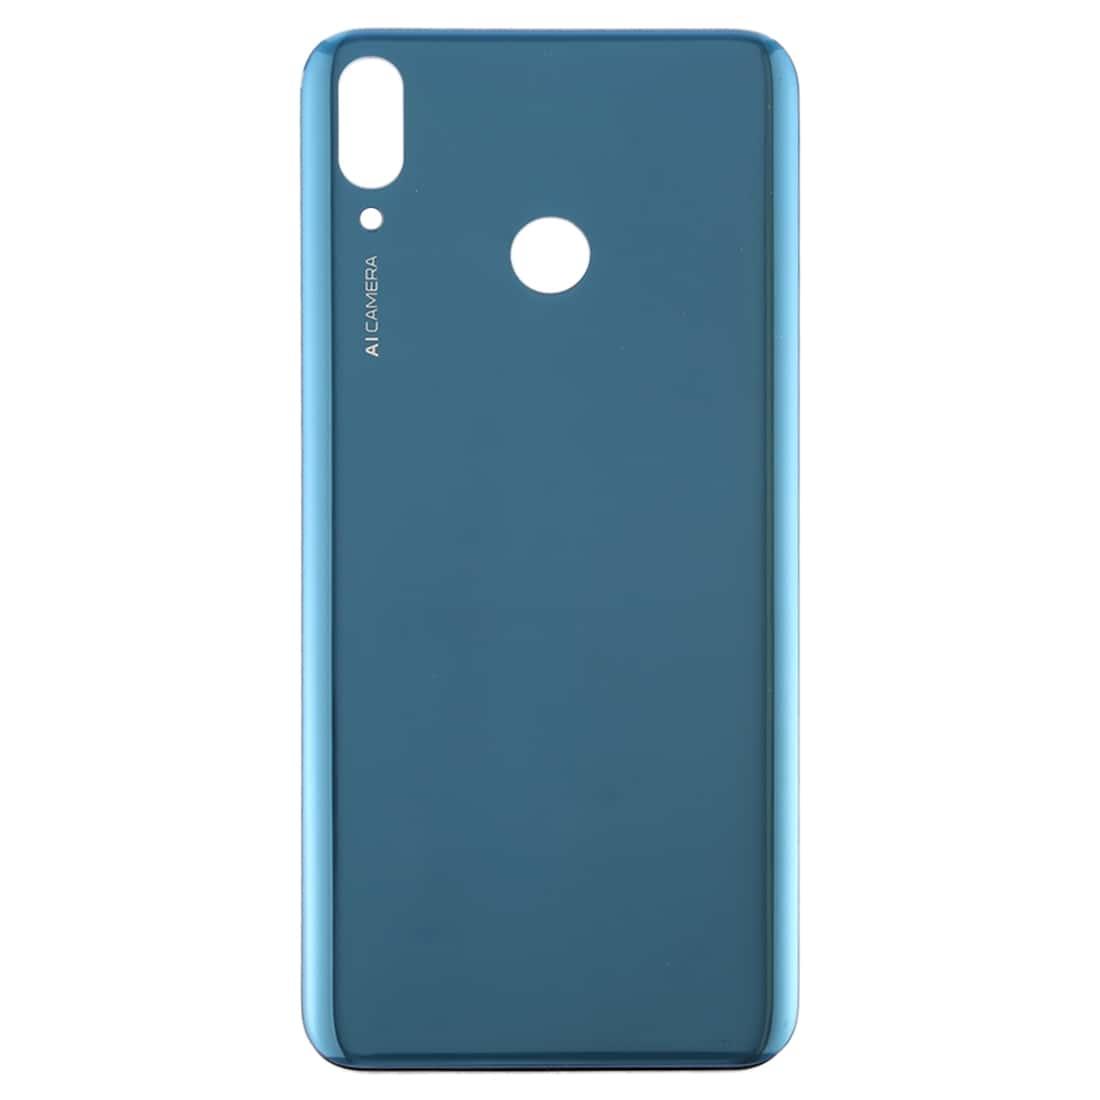 Back Panel Housing Body for Huawei Y9 2019 Blue